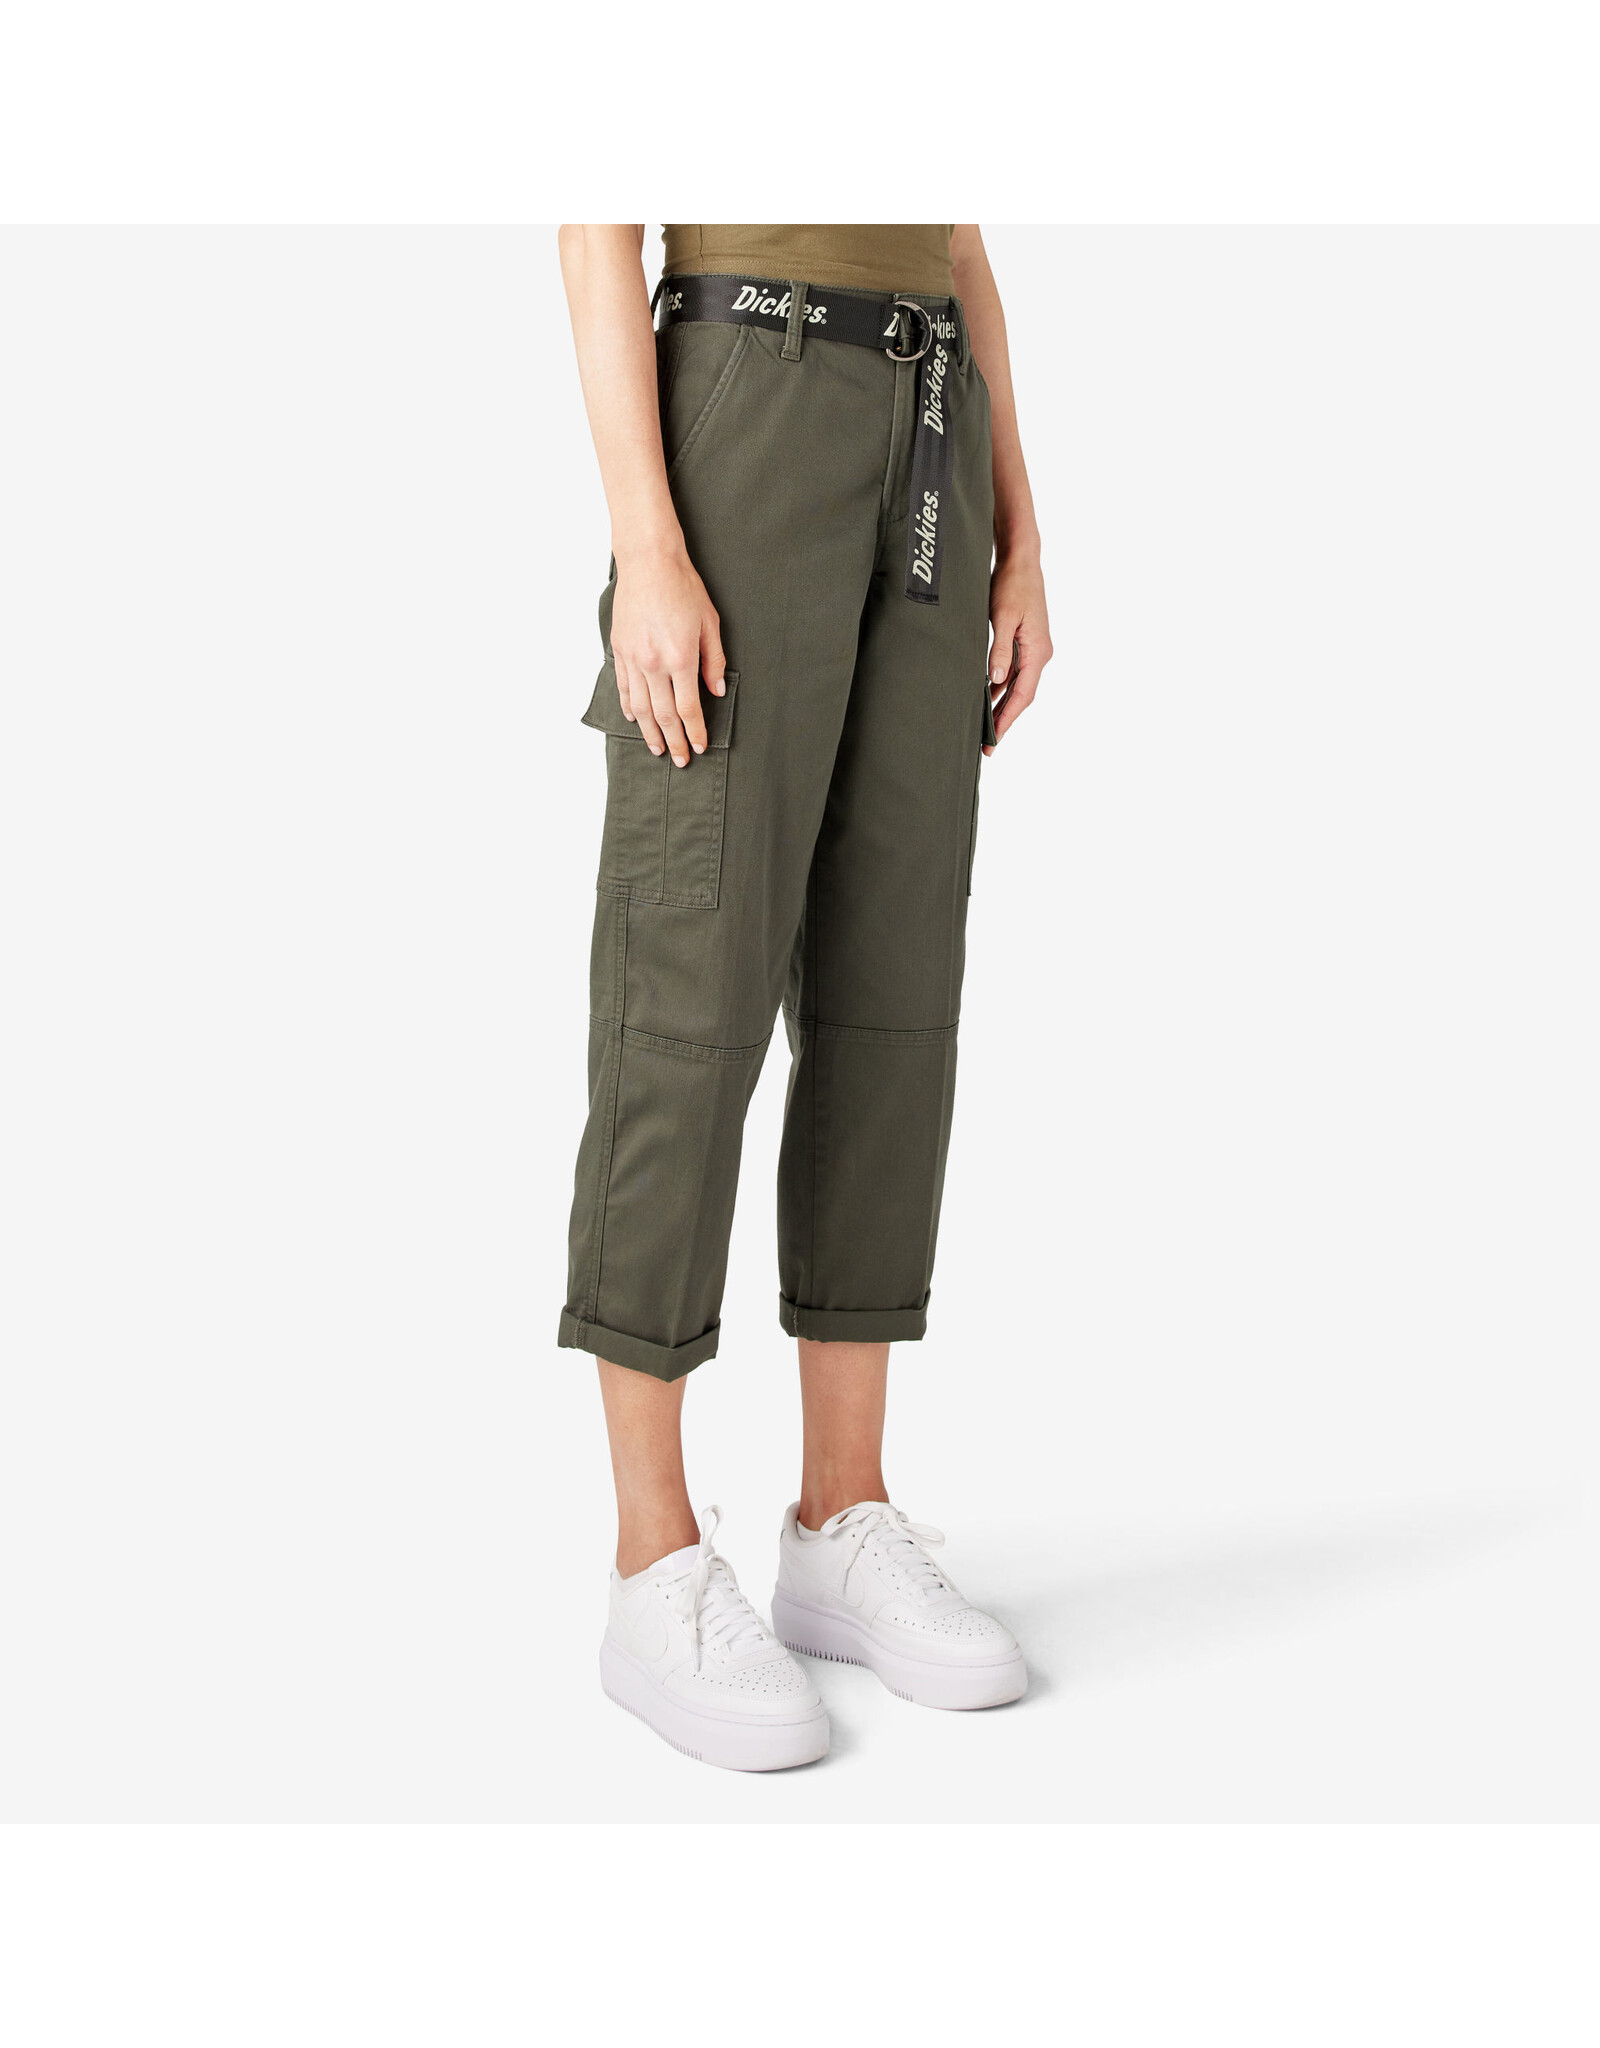 DICKIES Women's Relaxed Fit Cropped Cargo Pants Olive Green - FPR50OG